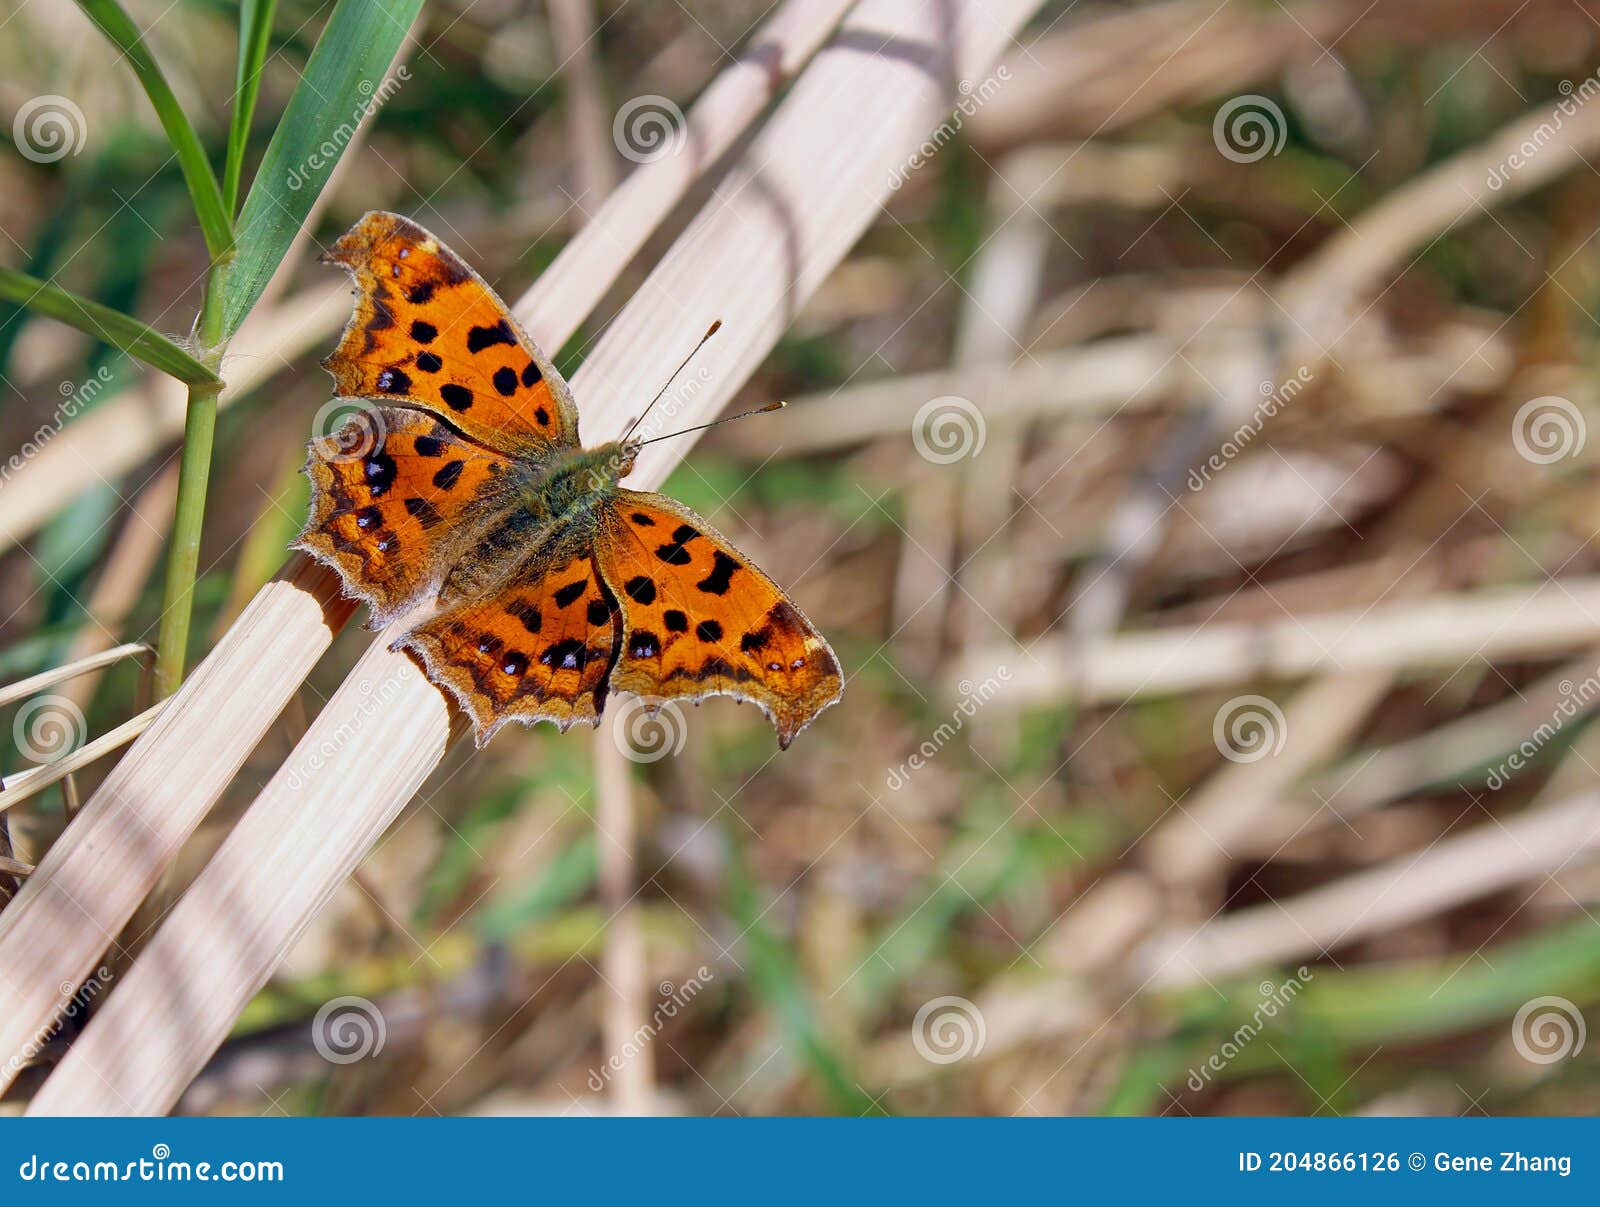 lovely orange butterfly of asian comma, polygonia c-aureum